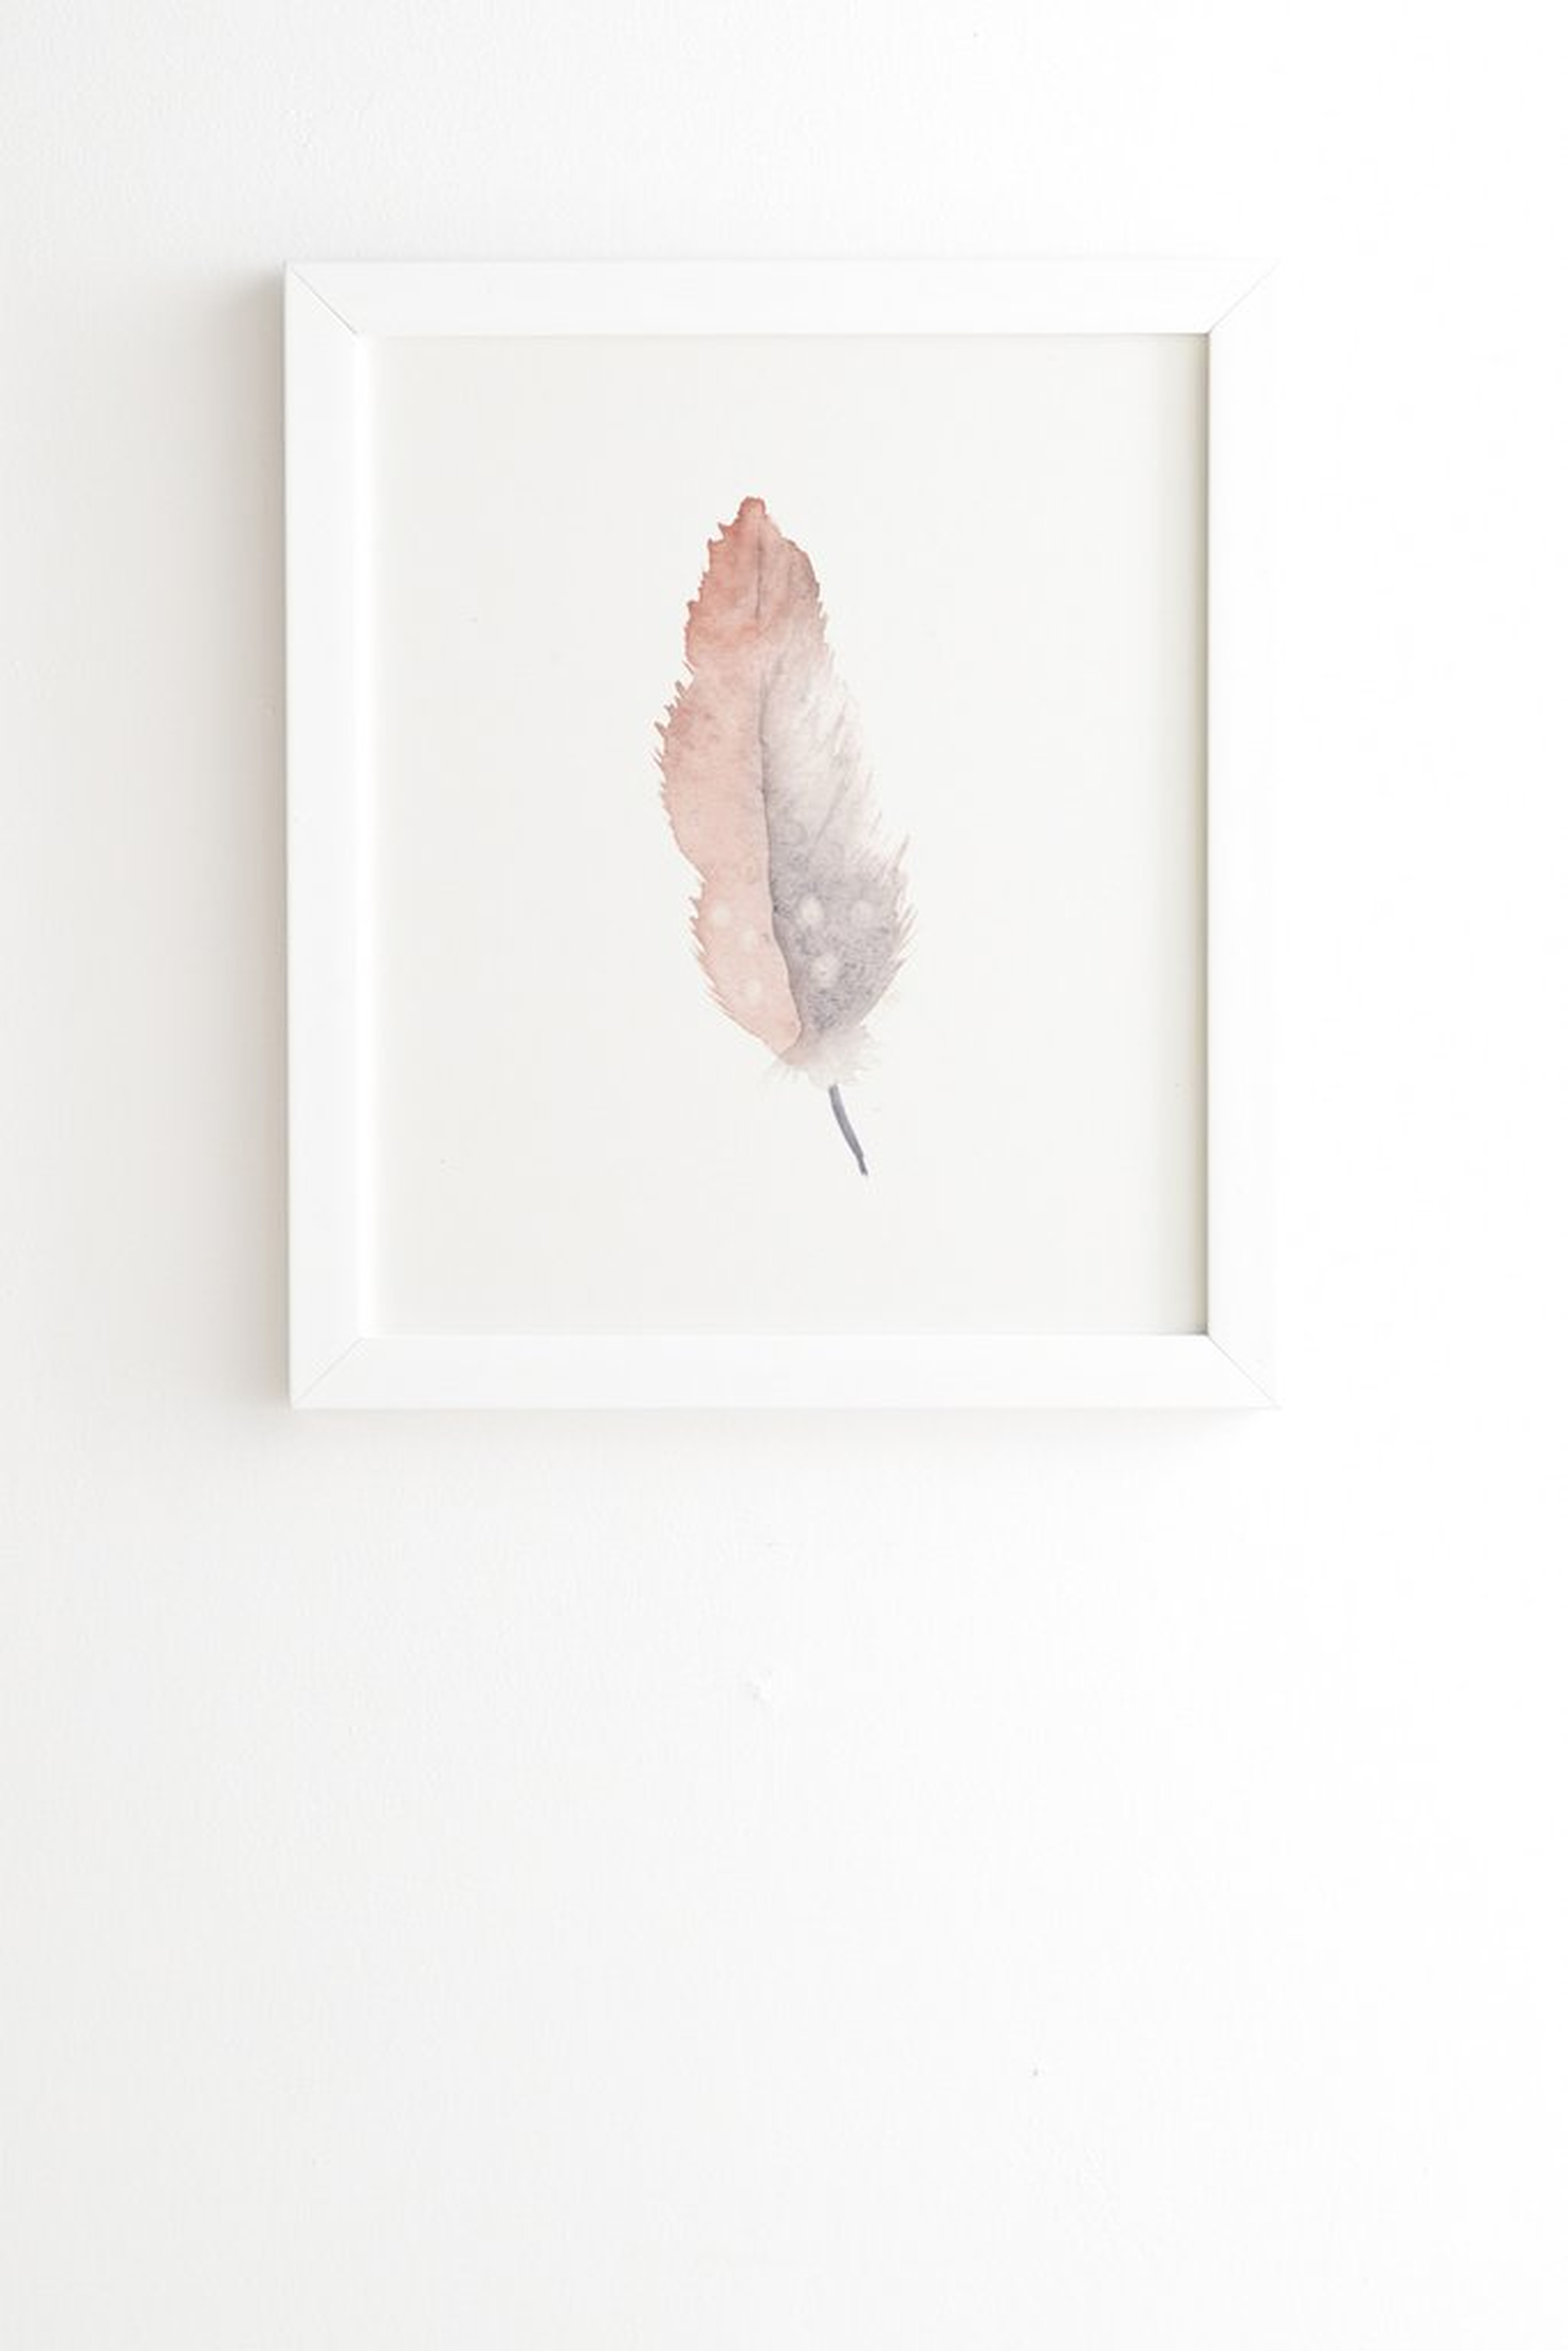 FREEDOM FEATHER Wall Art - 8" x 9.5" - White Frame - No Mat - Wander Print Co.